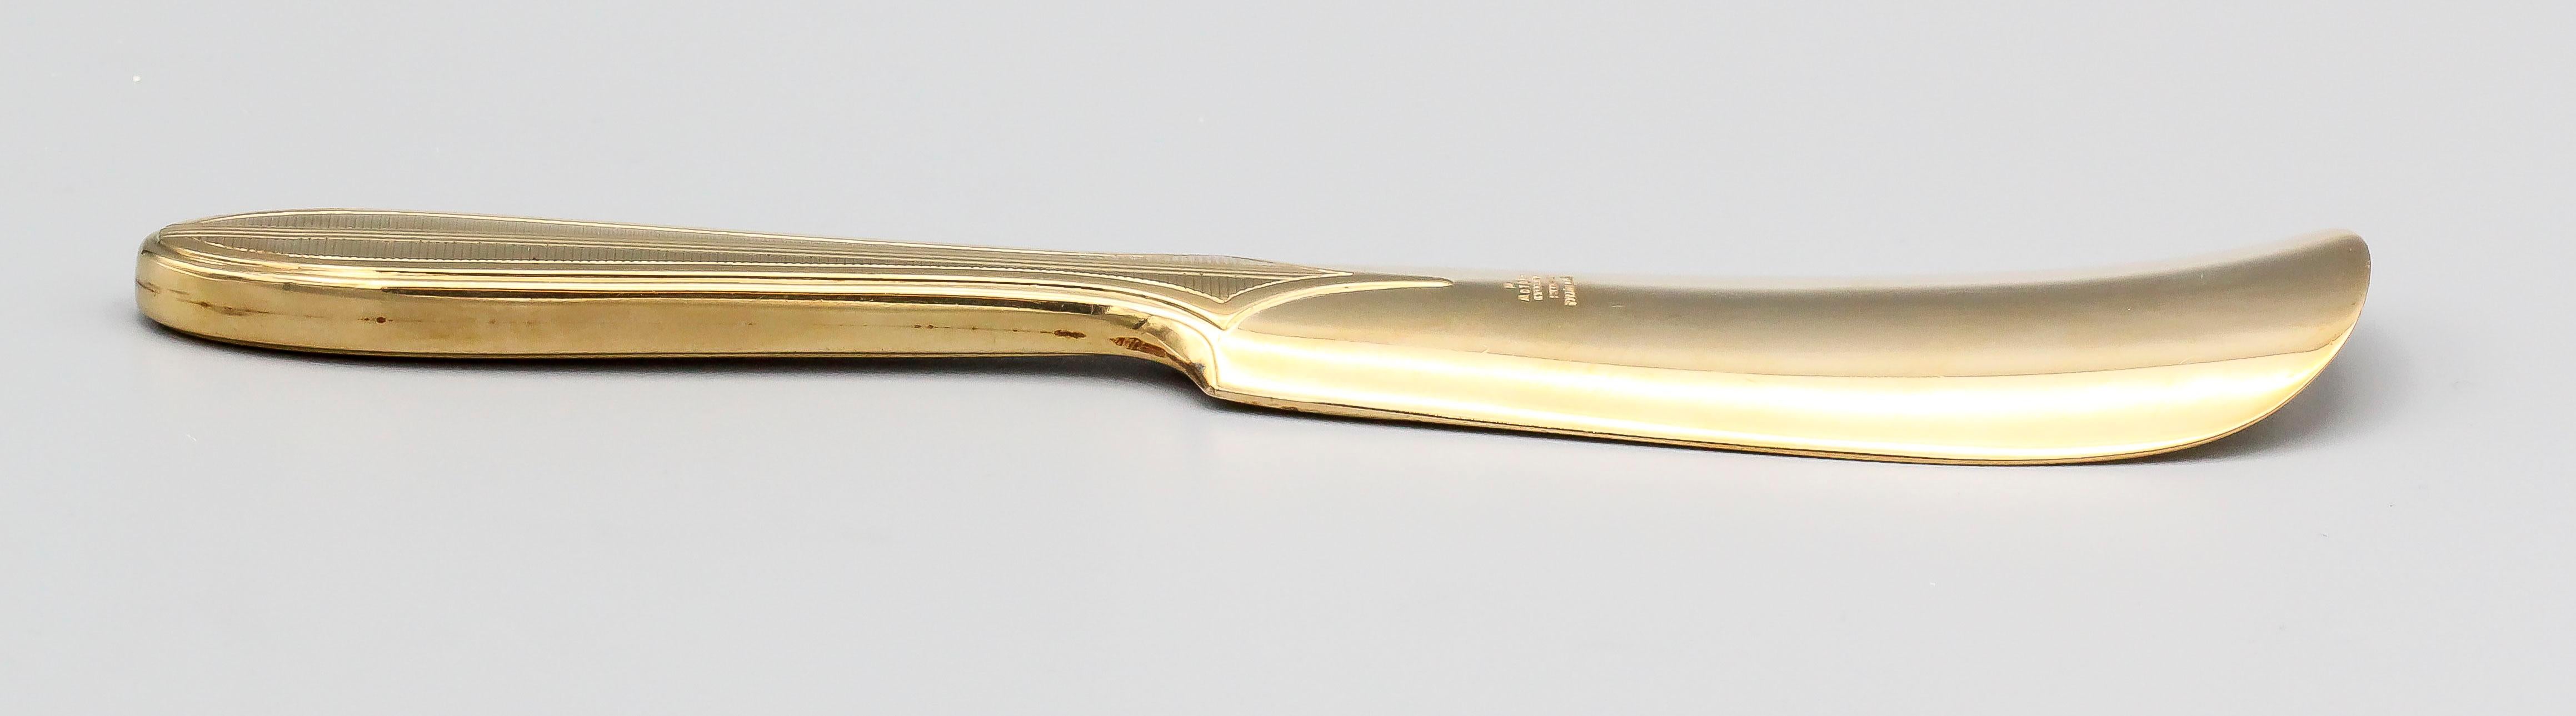 Chic and unusual 14K yellow gold shoehorn by Tiffany & Co.  It features a ribbed design to both sides of the handle with initials on bottom. A handsome gift for a dapper gentlema.n

Hallmarks: Tiffany & Co. Makers, 14KT Gold, reference numbers,